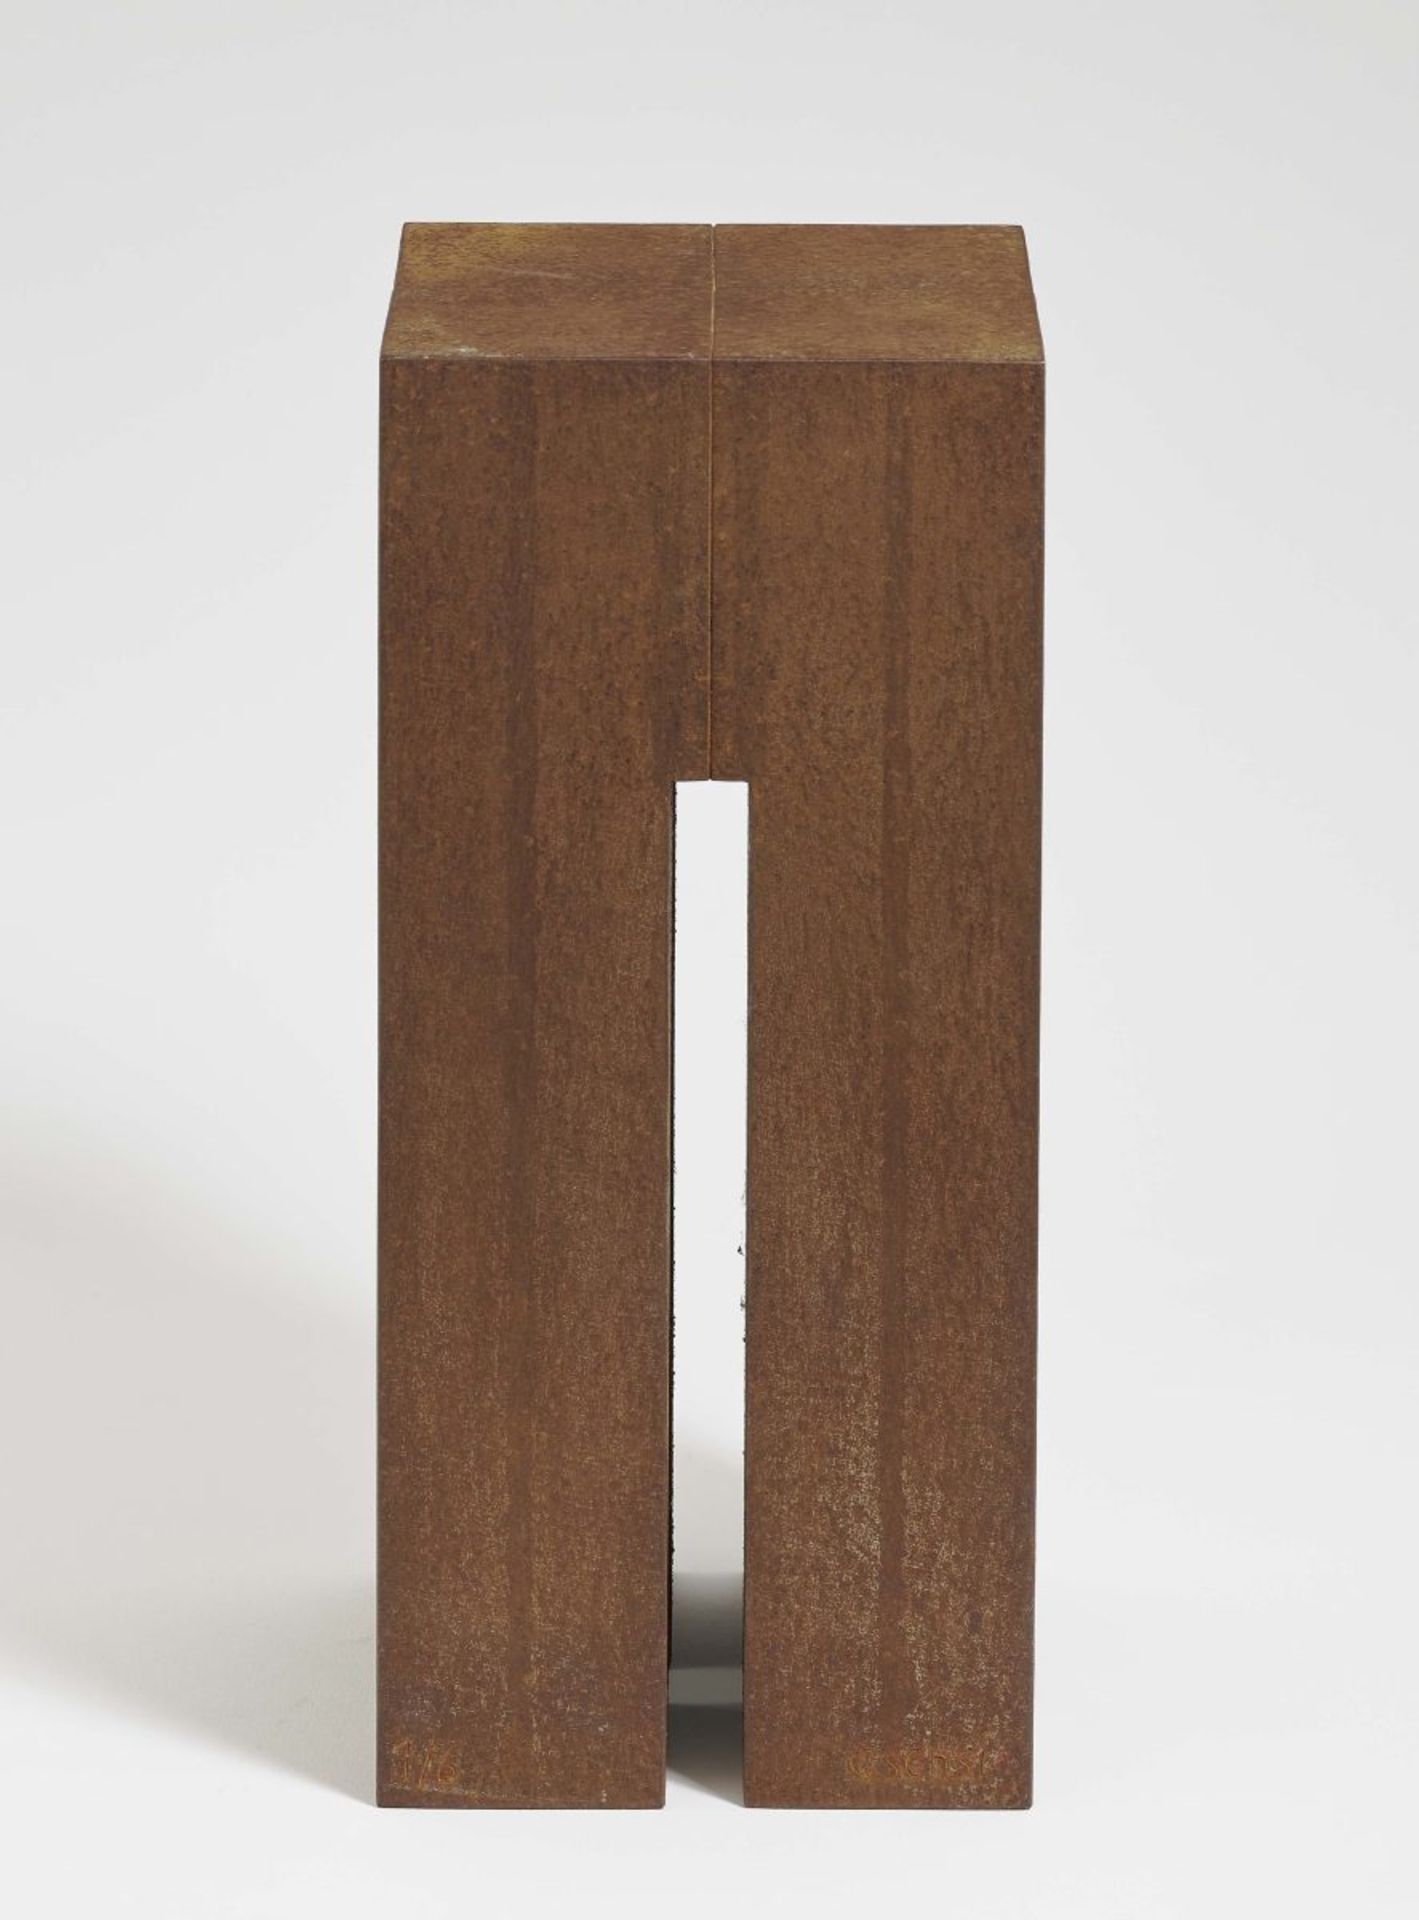 Asensi, EnriqueUntitled. 2008 Corten steel 33 x 14 x 14 cm Signed and numbered. Edition 1/6. - Bild 2 aus 2